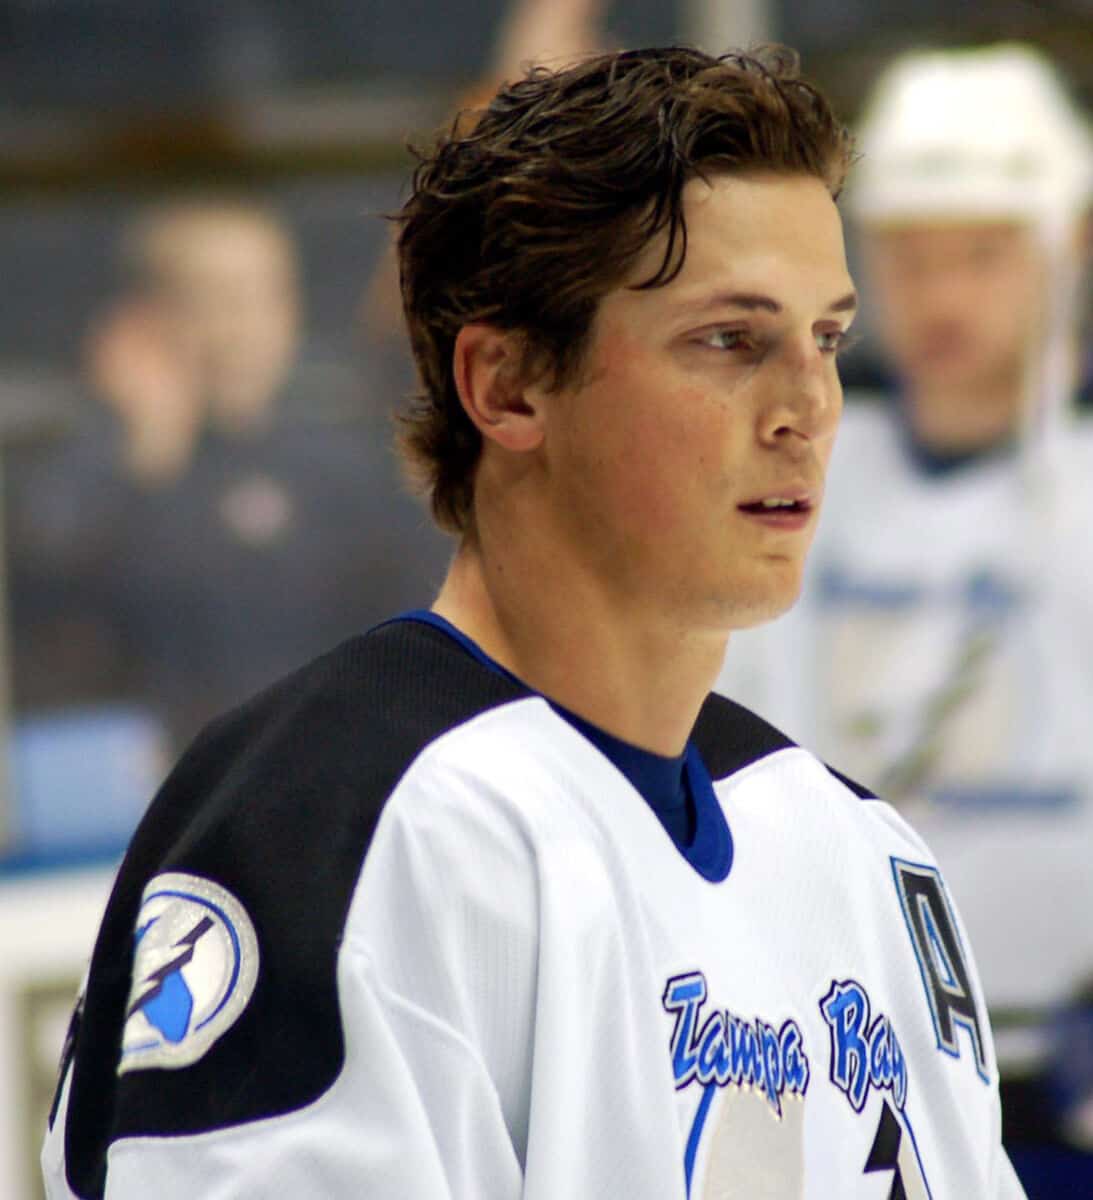 Vincent Lecavalier - Famous Ice Hockey Player